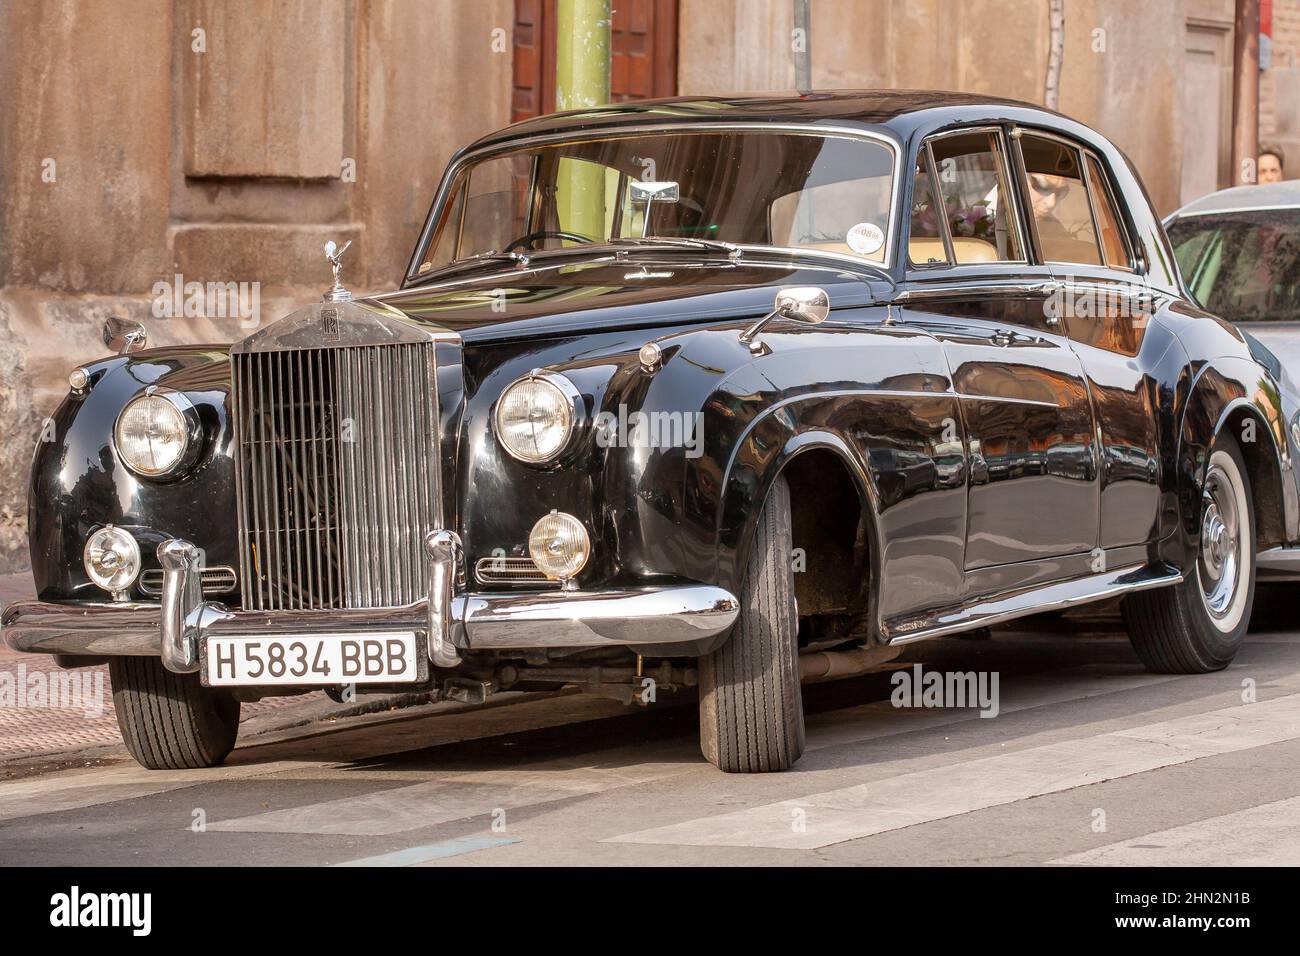 ALCALA DE HENARES, MADRID, SPAIN - OCTOBER 11, 2018: classic Rolls-Royce silver cloud from 1957 parked at the door of the church waiting for the newly Stock Photo